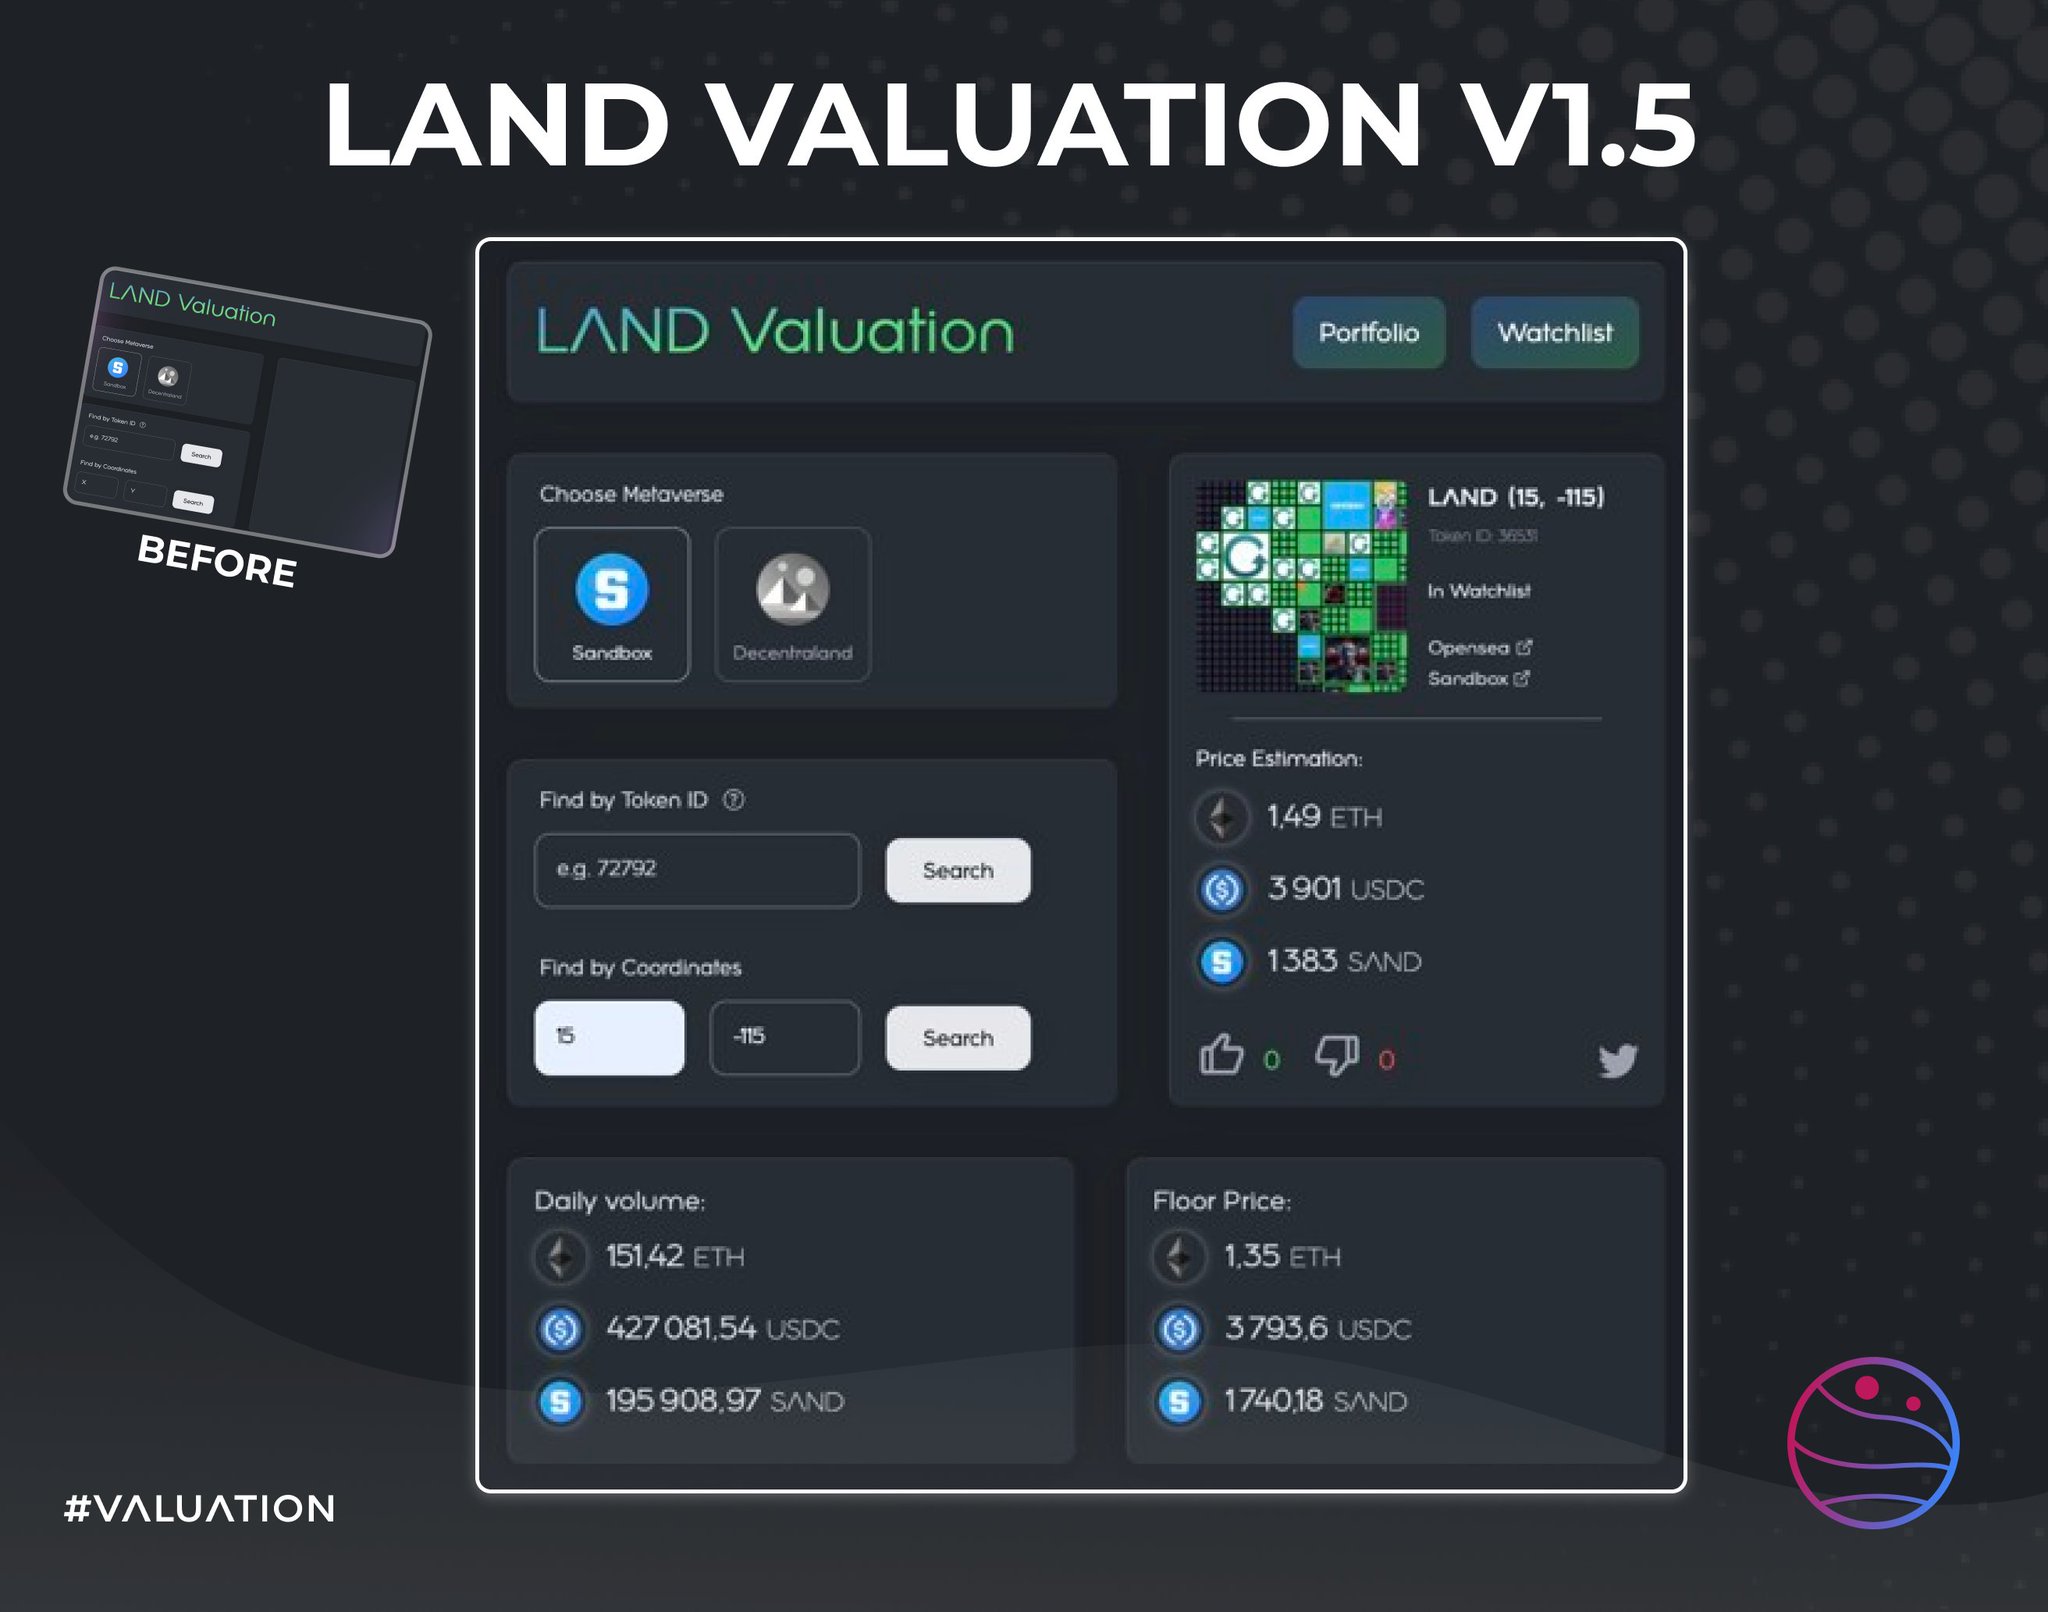 RT MGH_DAO: Our Land Valuation Tool V1.5 is online! 🔥  Get deep #Metaverse insights: ✔️ Life sales tracker ✔️ Watchlist ✔️ Portfolio integration  Constantly adding value with our partners  @TheSandboxGame and @decentraland  🚀  Try it👇 [bit.ly] [twitter.com] [pbs.twimg.com]